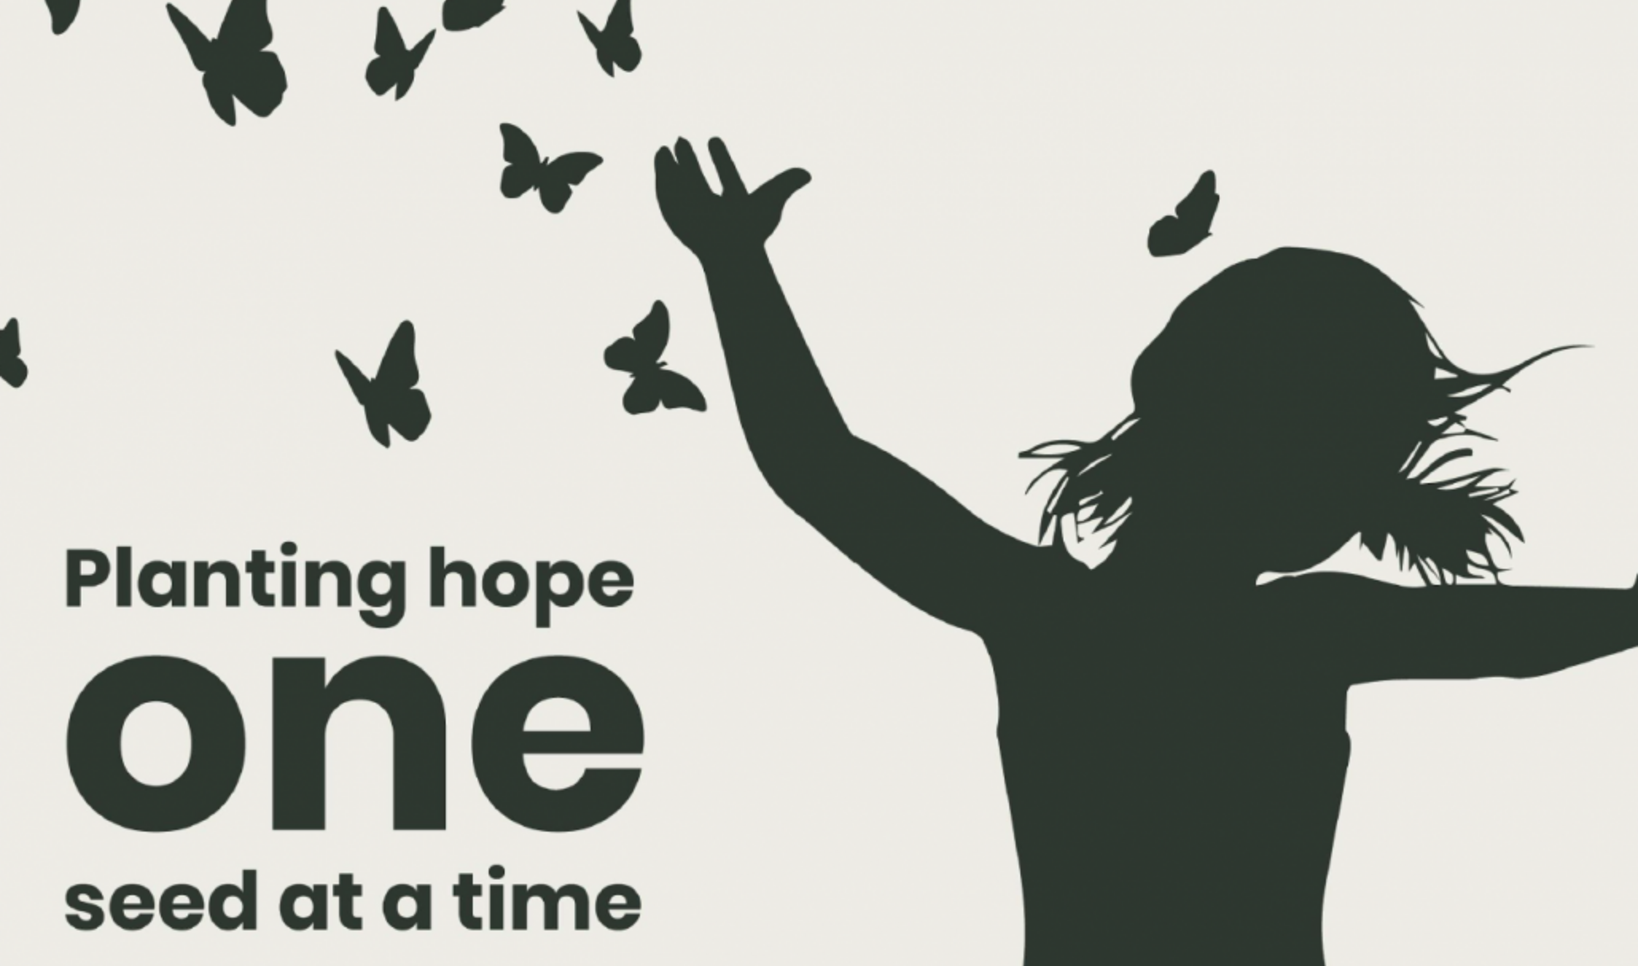 "Planting Hope One Seed at a Time" by Becca Albert. ; Image credit: Becca Albert